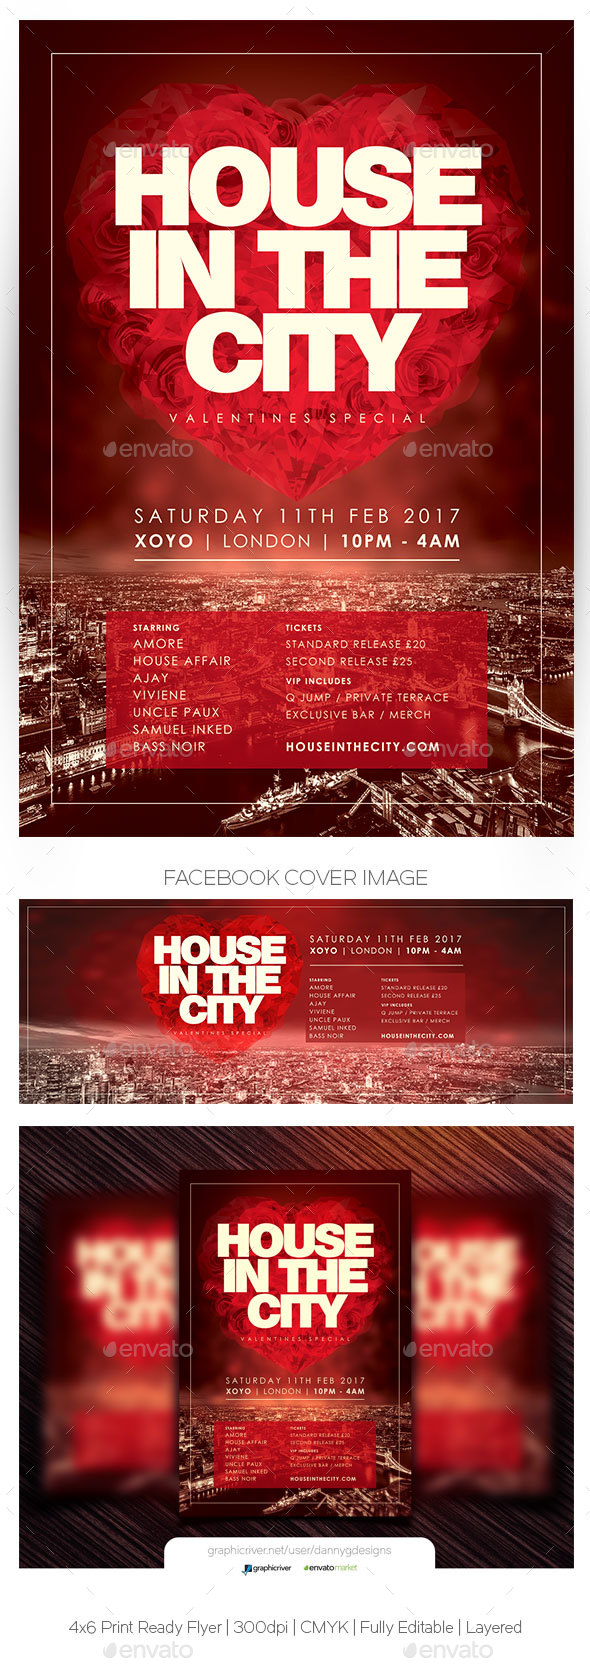 House In The City Valentines Day Flyer